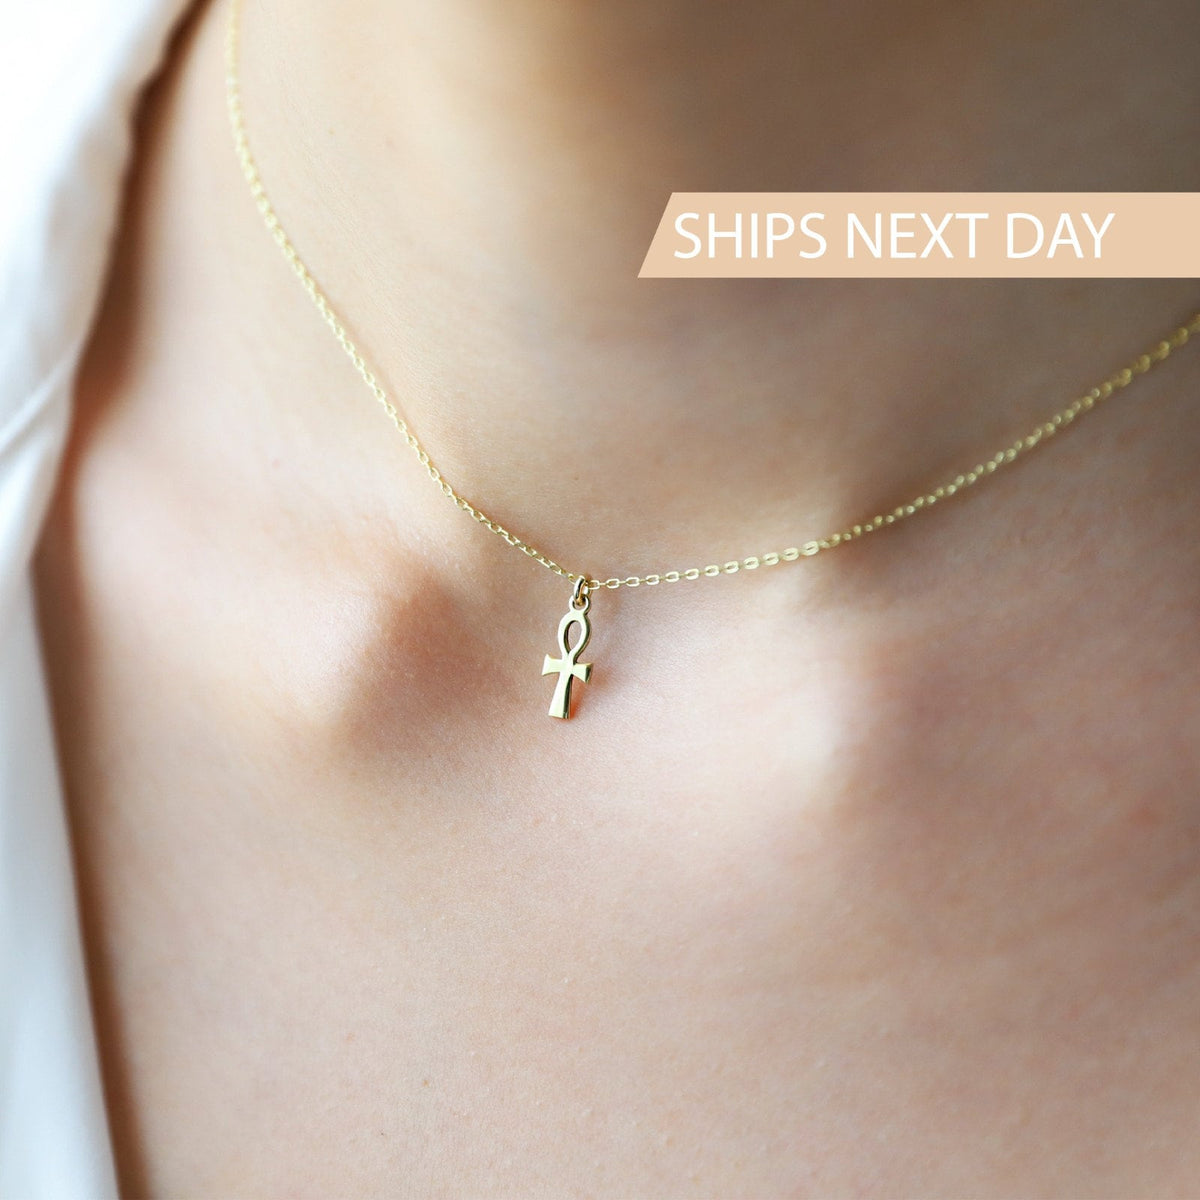 14K Gold Minimal Ankh Necklace, Ancient Symbol Pendant Necklace • Egyptian Ankh Jewelry, Last Minute Anniversary, Birthday, Christmas Gifts